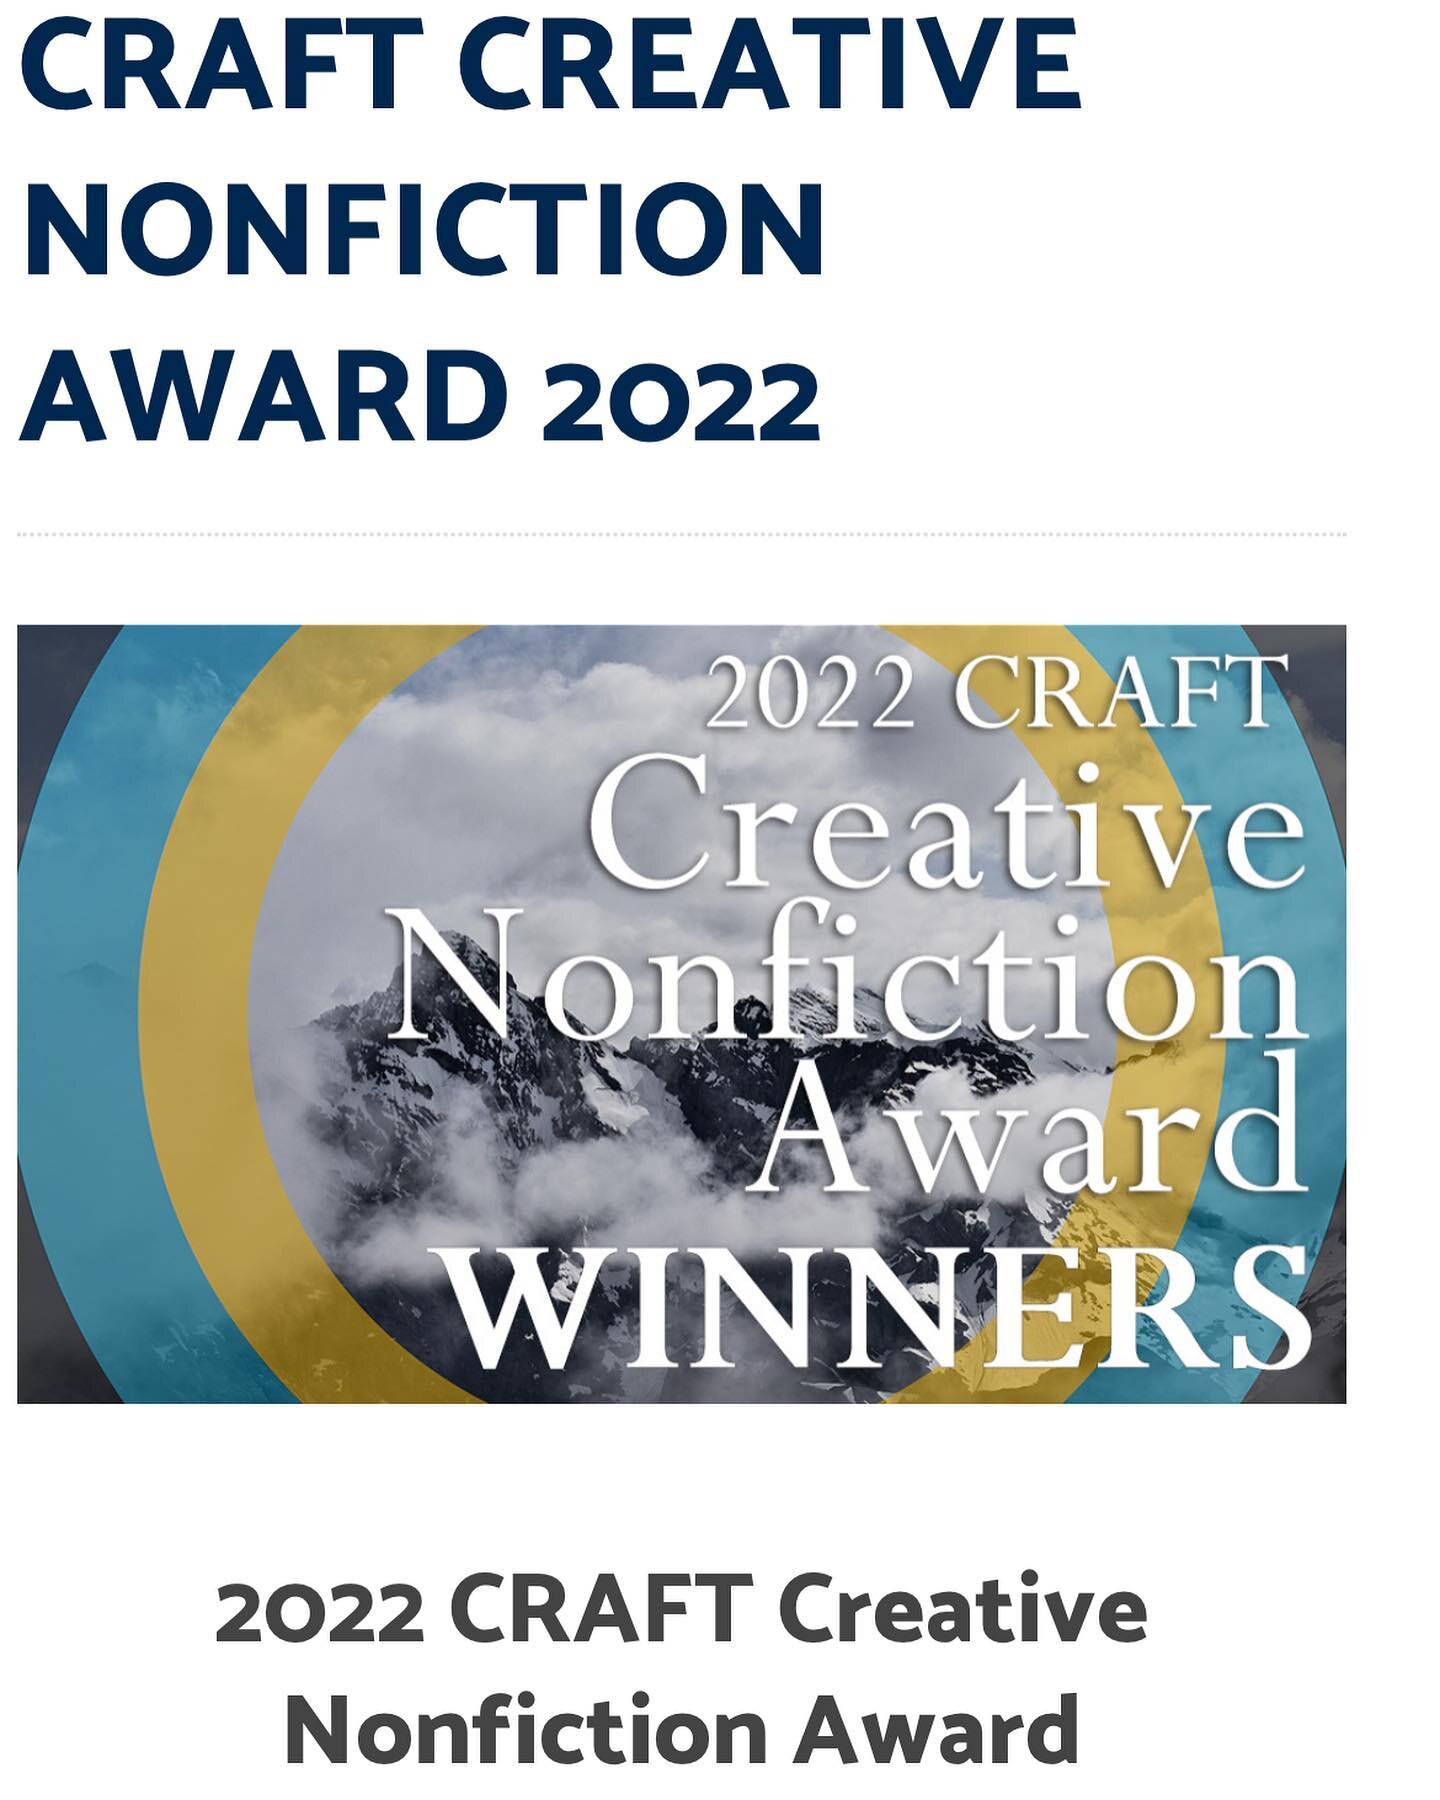 Incredibly honored that my essay was a finalist in CRAFT's Creative Nonfiction Award. Big congratulations to all the winners, editor's choice recipients, and finalists! I'm so looking forward to reading the essays! ✨✨